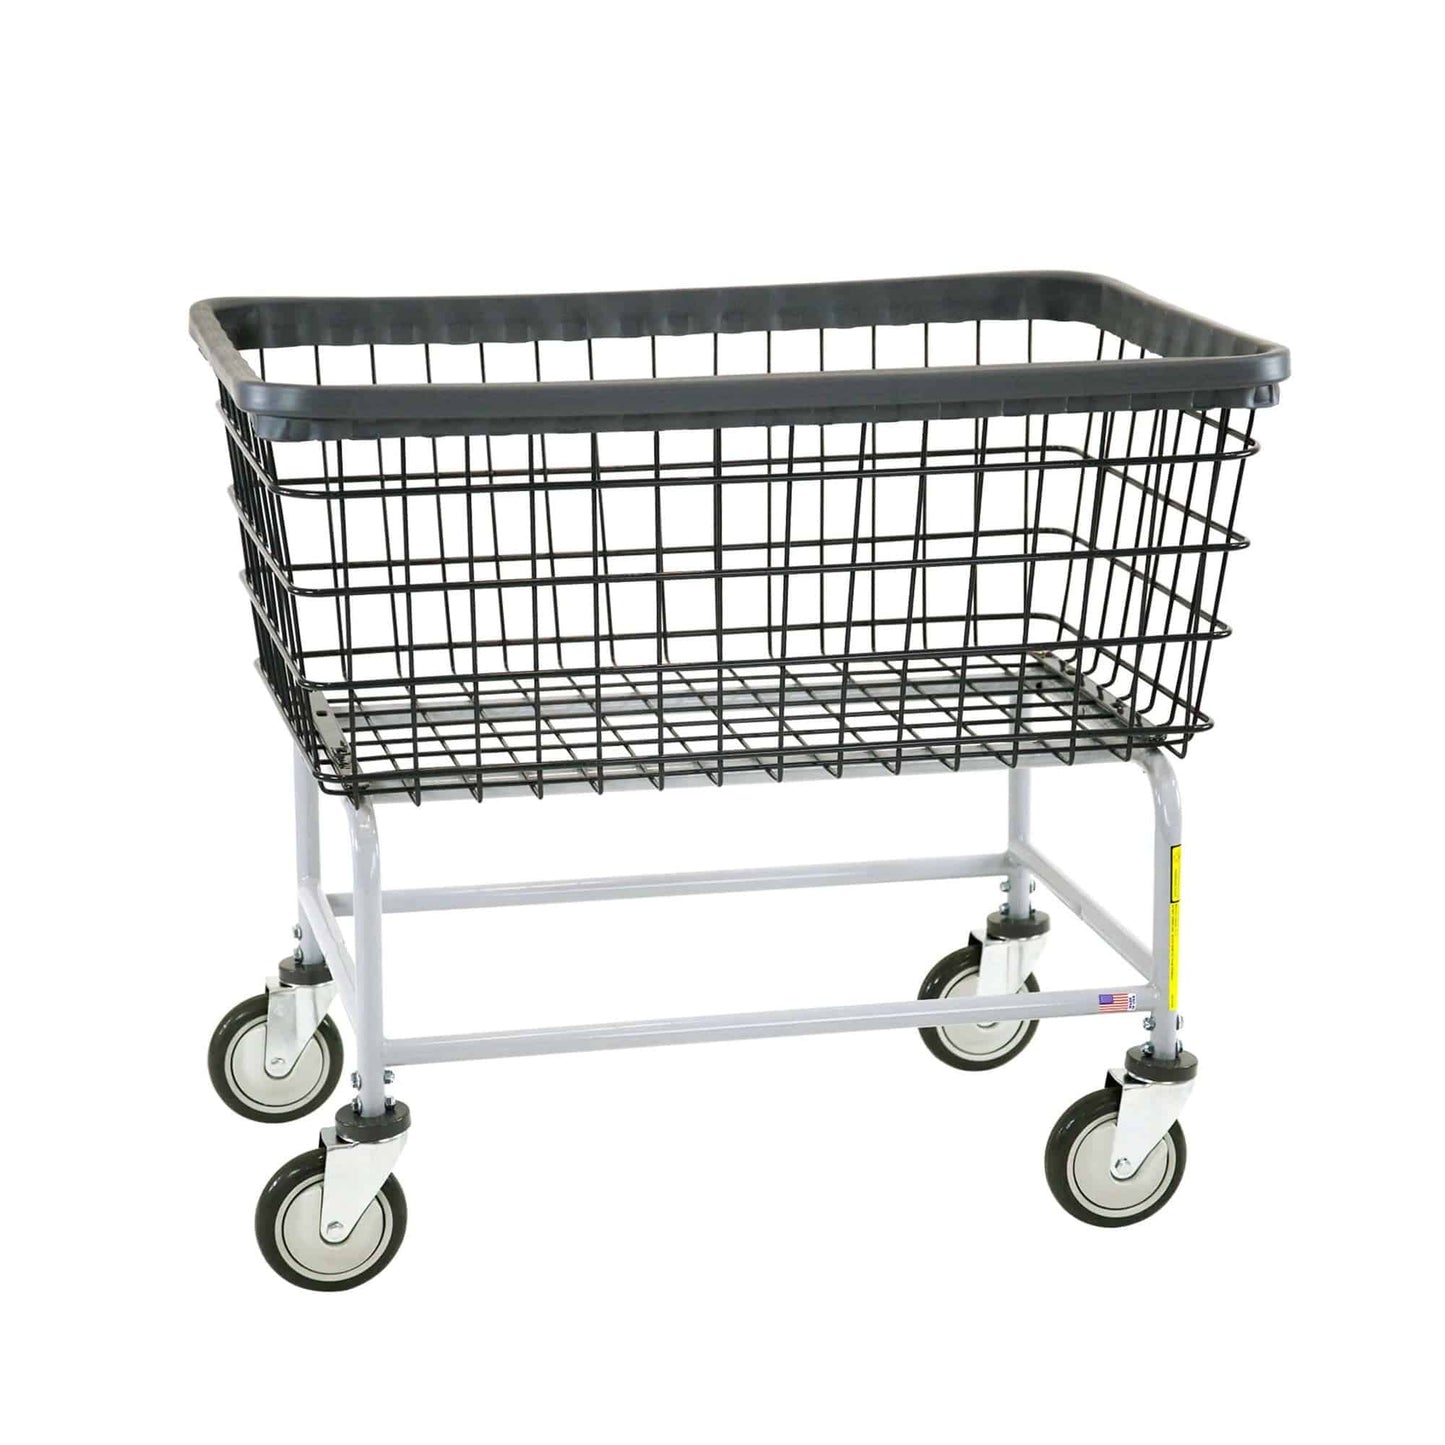 Large Capacity Laundry Cart - R&B Wire